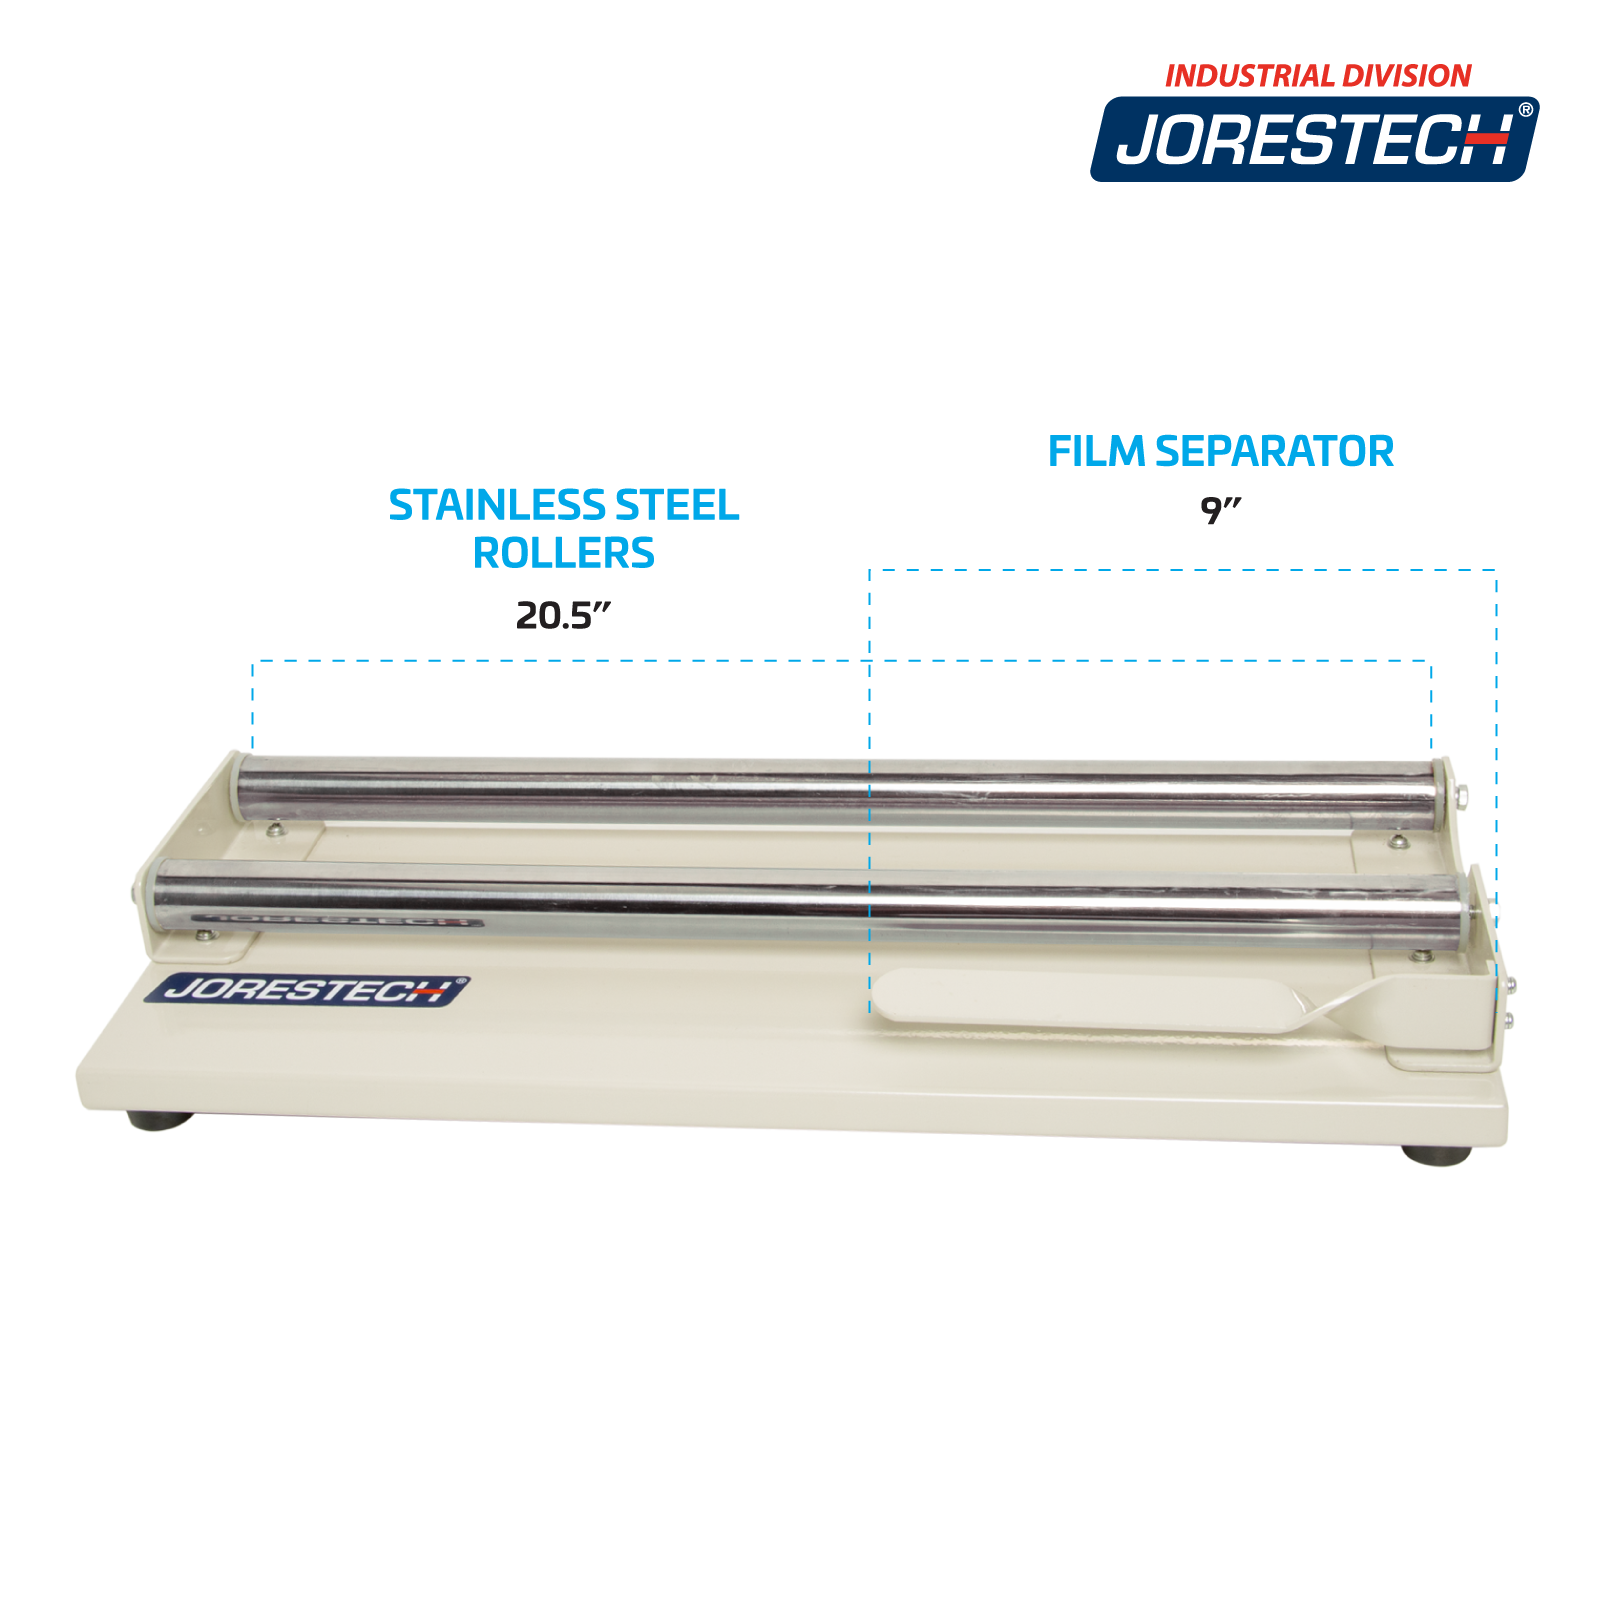 JORES TECHNOLOGIES® plastic shrink roll dispenser showing measurements of stainless steel rollers (20.5